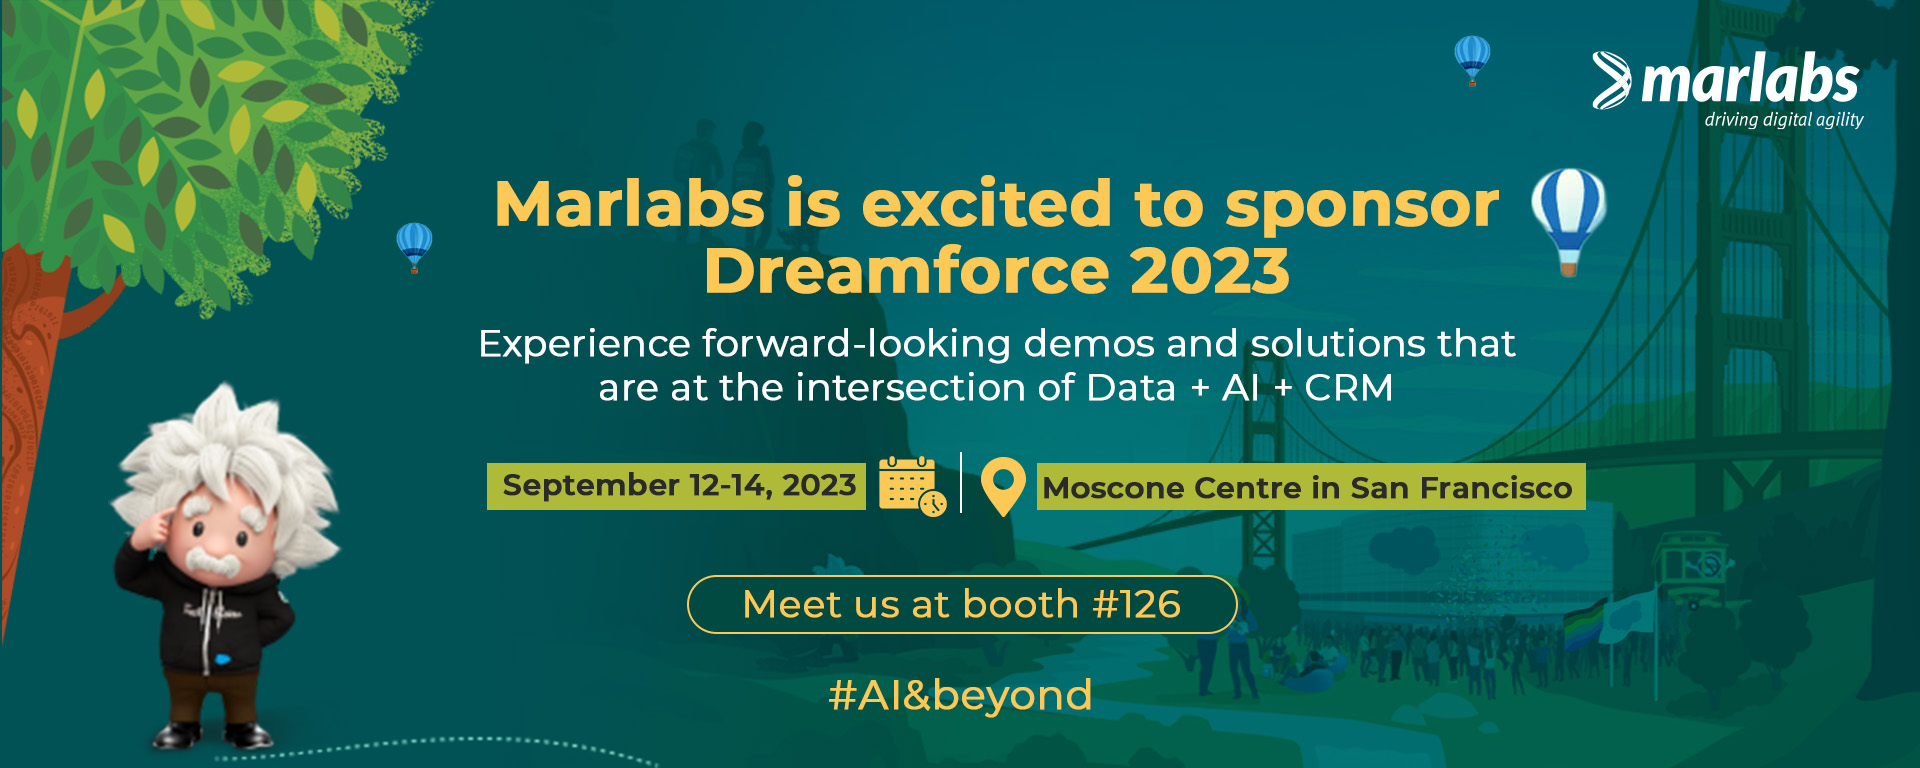 Dreamforce-2023-Projects-works